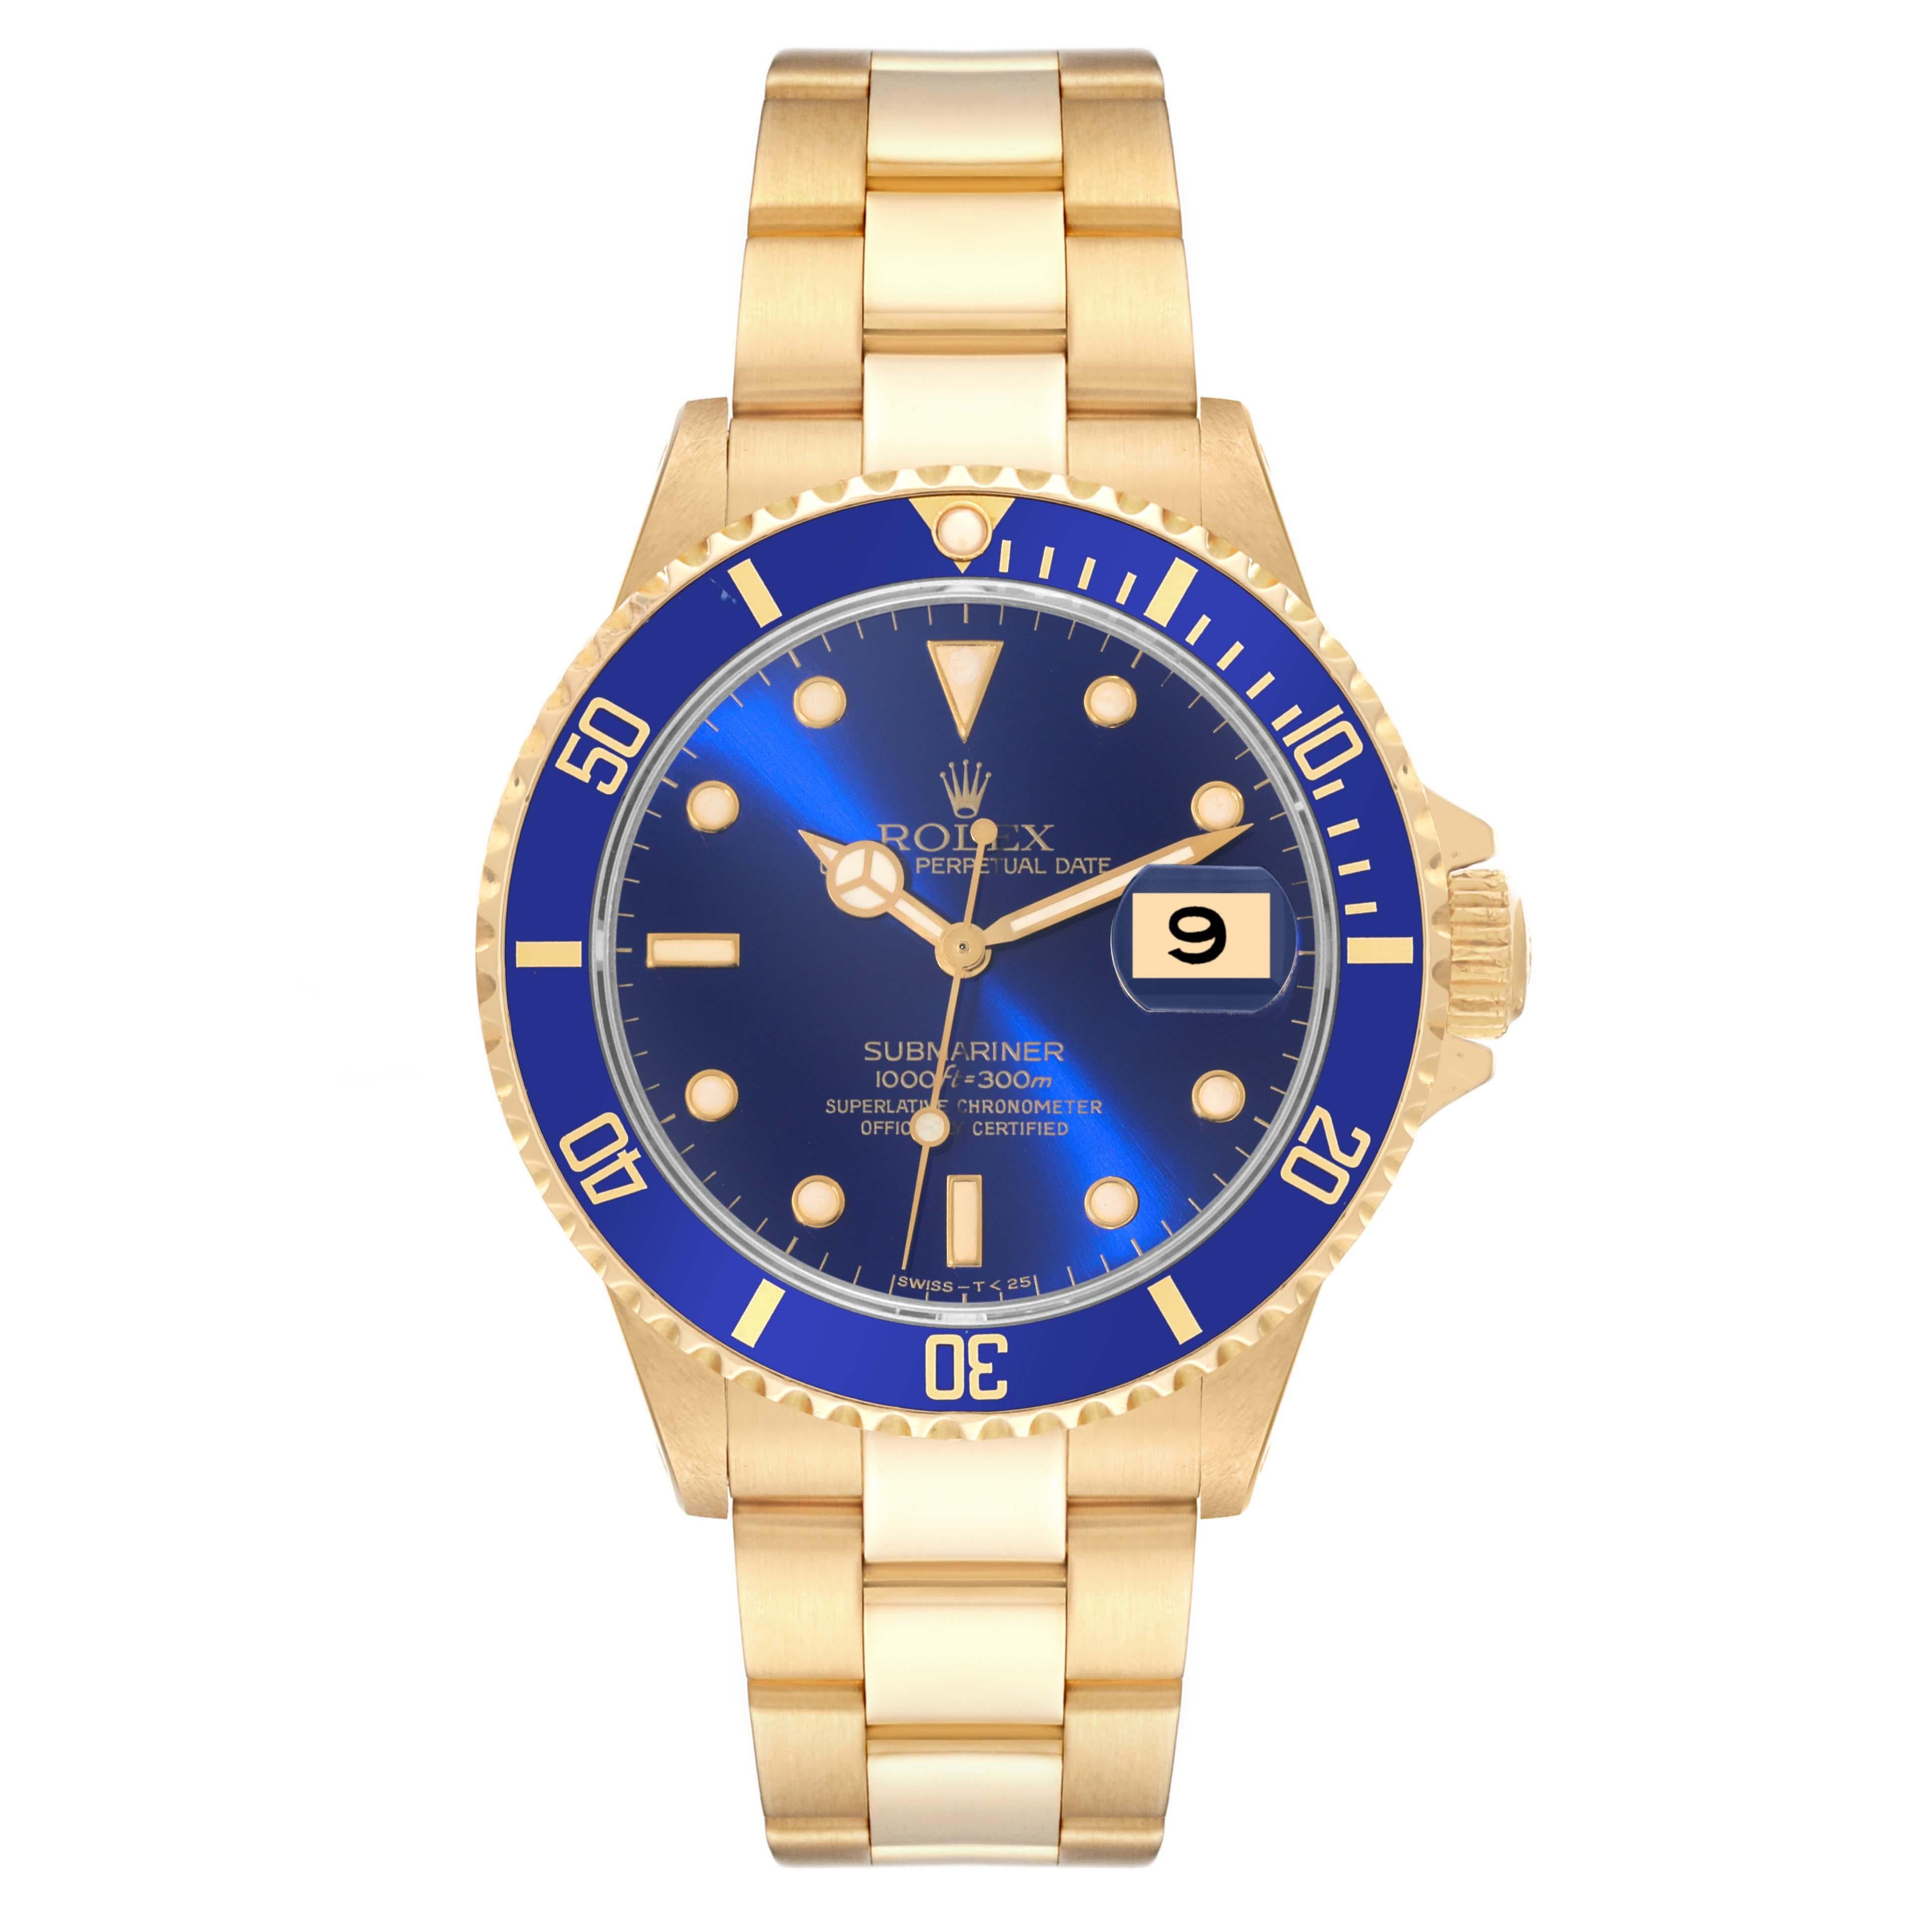  Rolex Submariner Yellow Gold Blue Dial 40mm Mens Watch 16618 Pour hommes 